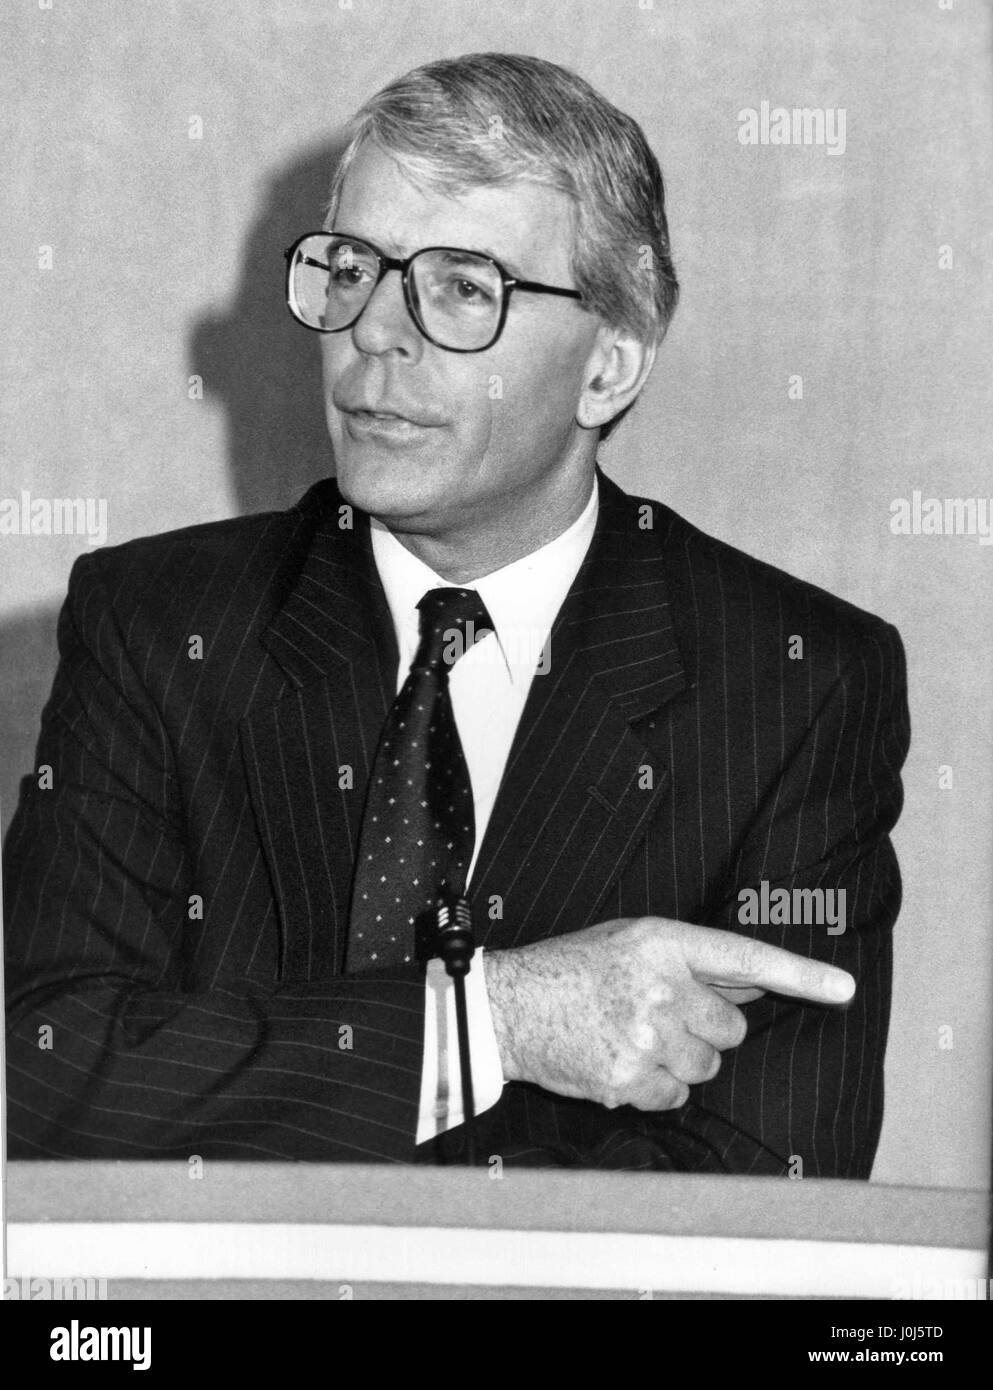 Rt. Hon. John Major, British Prime Minister and Leader of the Conservative party, speaks at a party press conference in London, England on March 20, 1992. Stock Photo